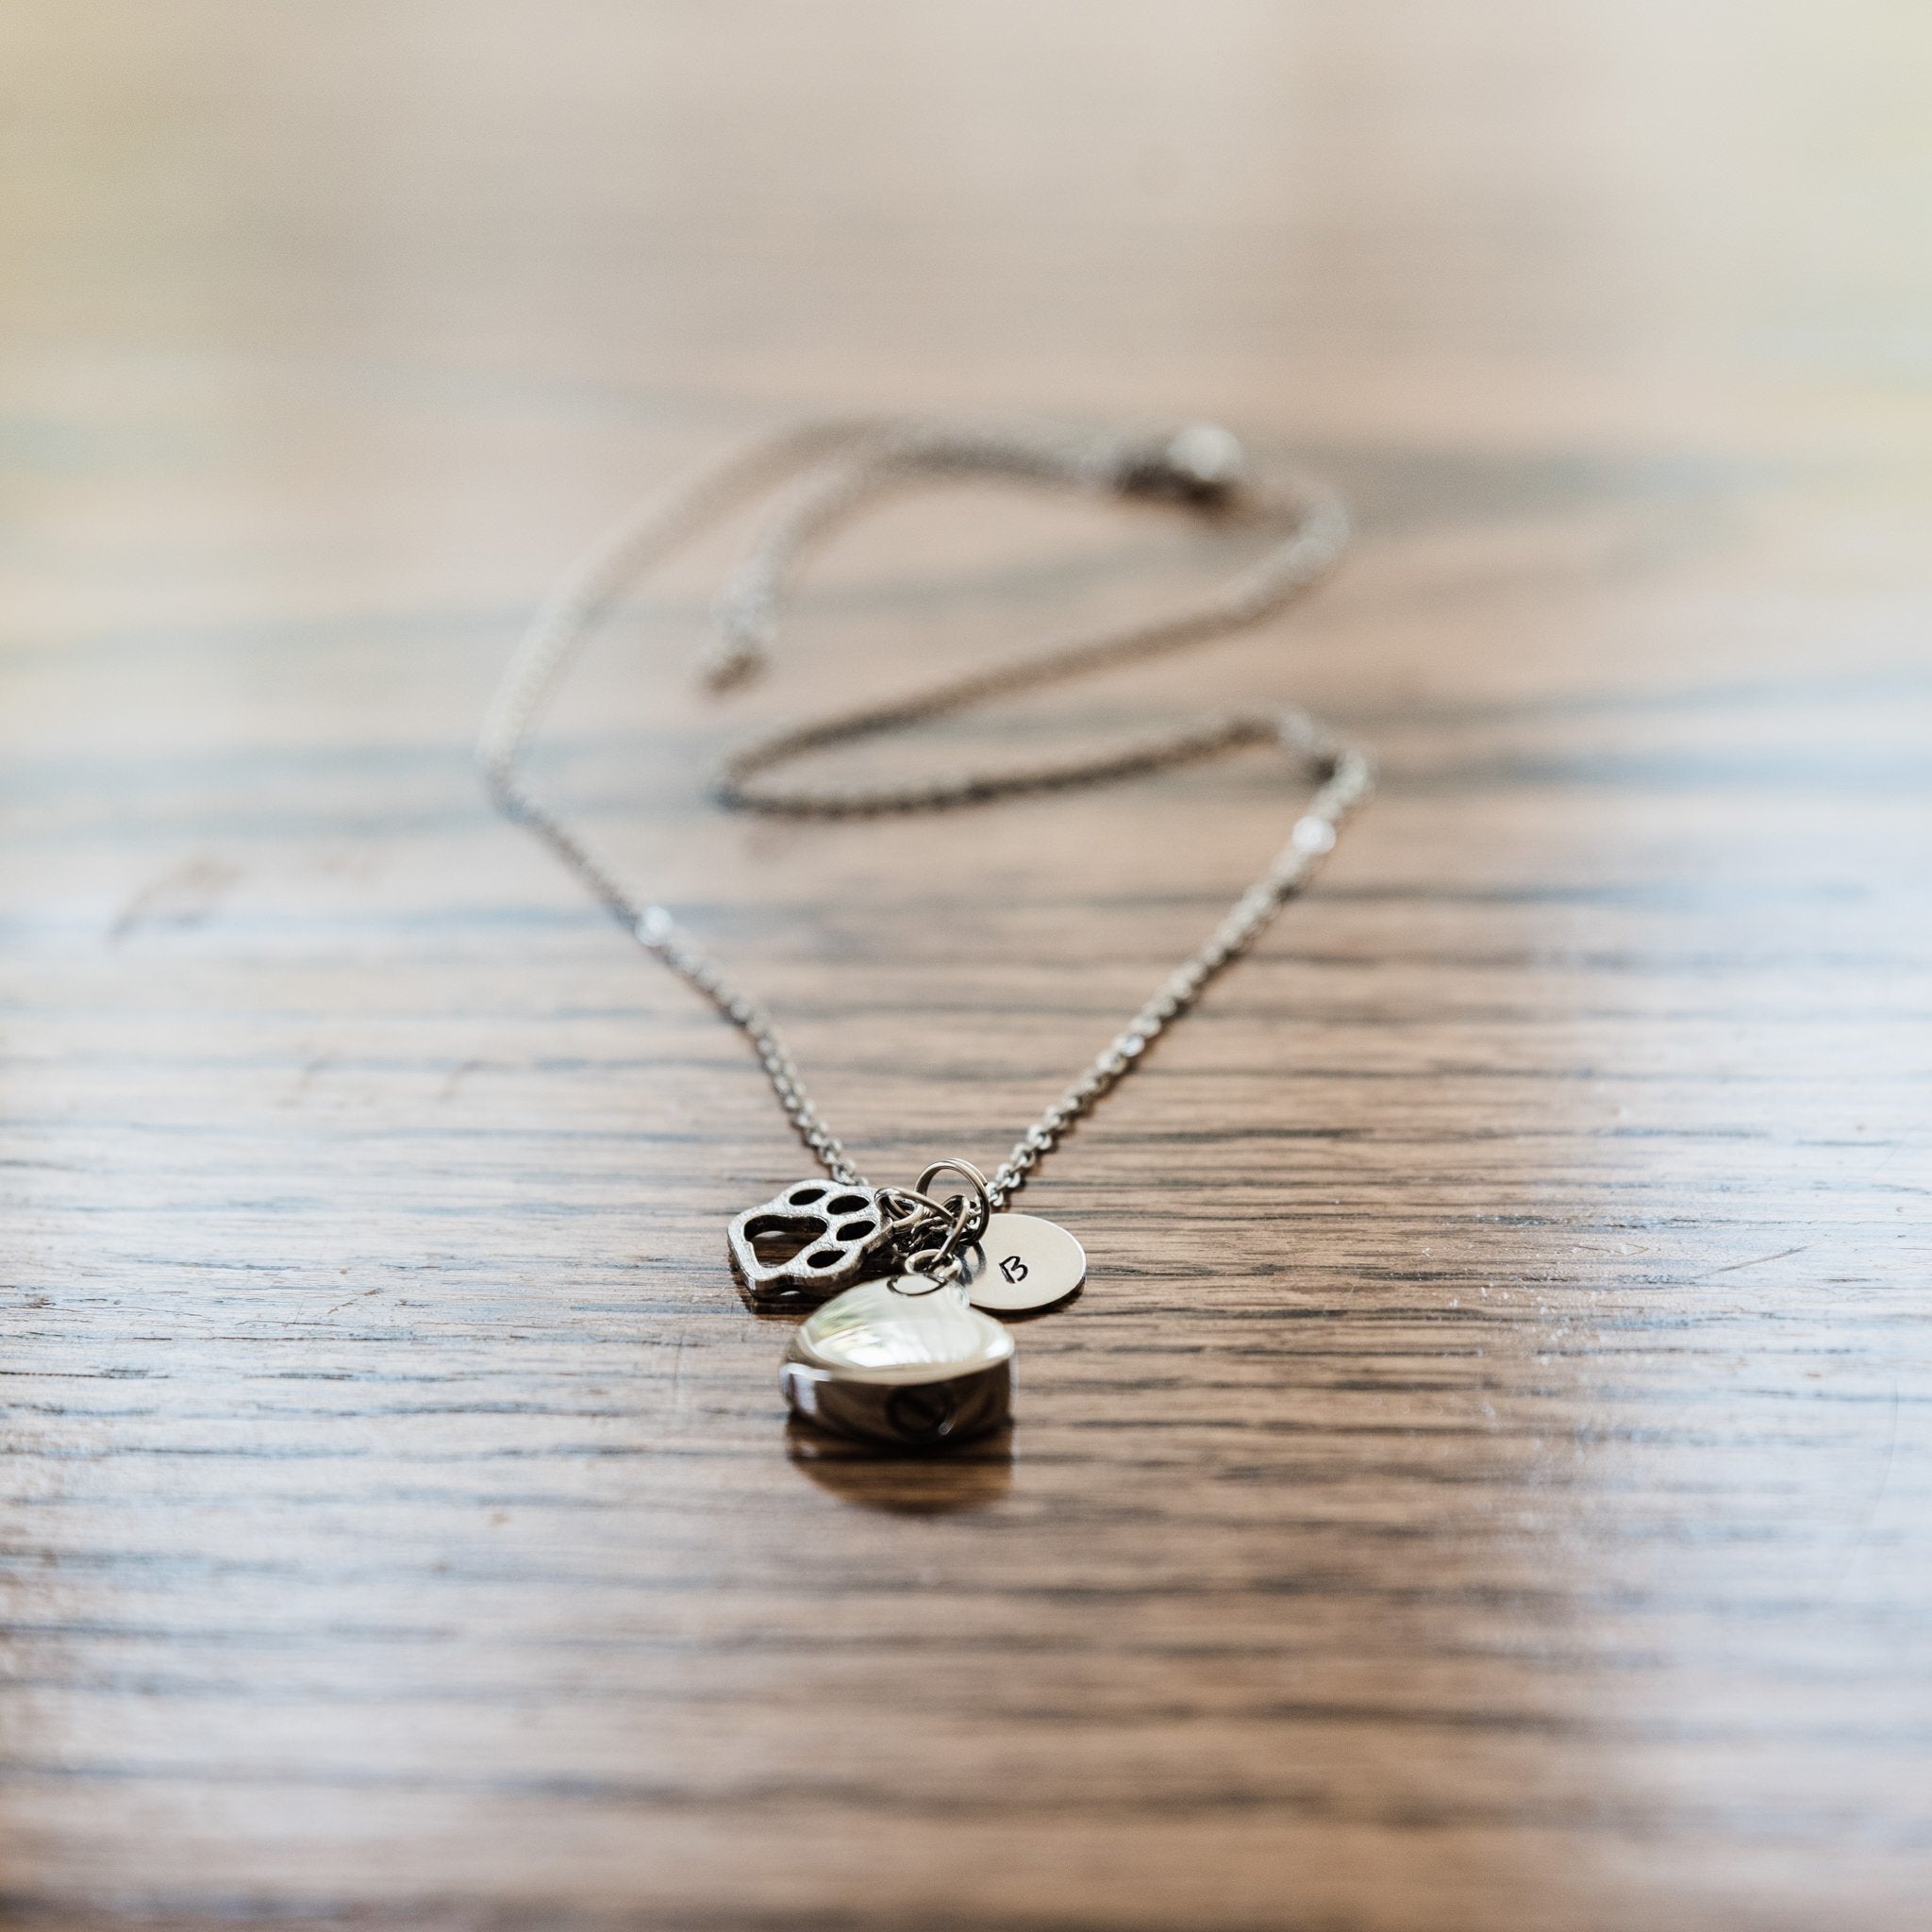 Memorial Ashes Imprint Dog Tag Silver Necklace By Hold upon Heart |  notonthehighstreet.com